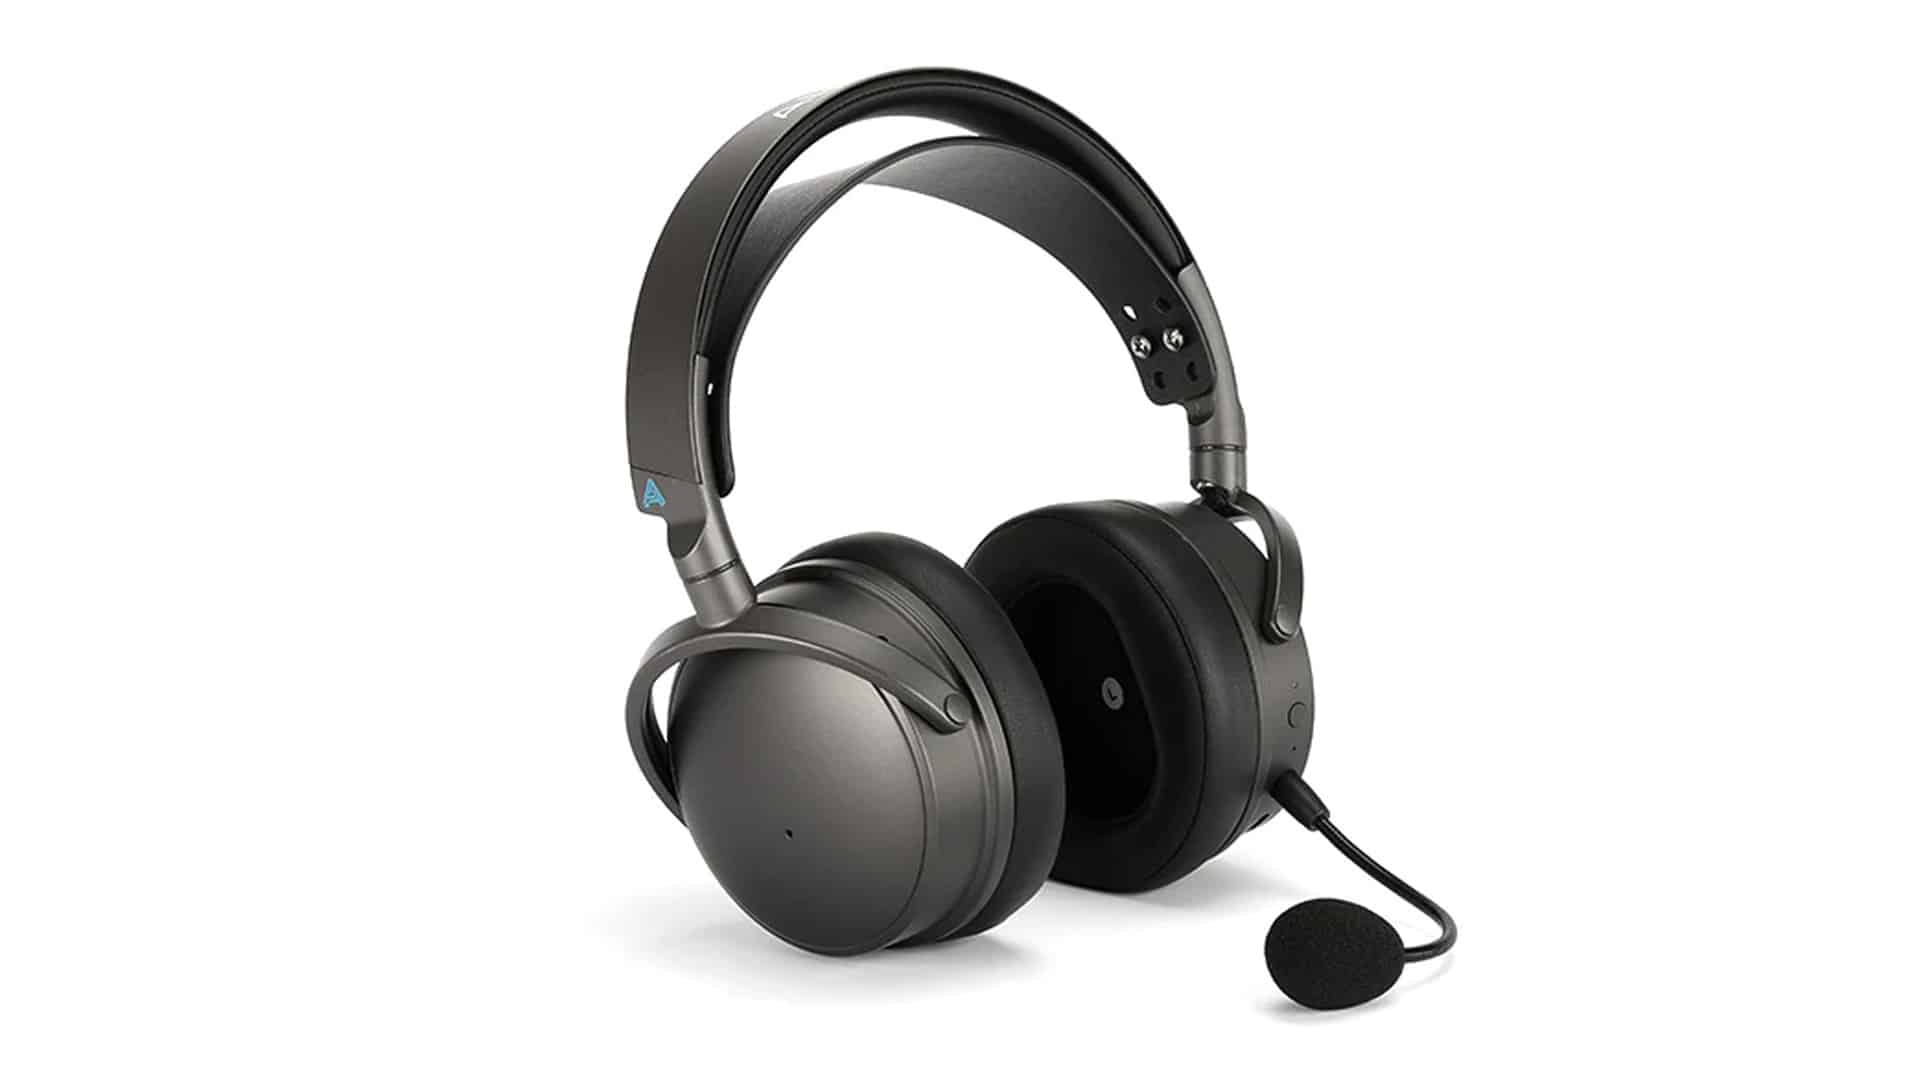 Audeze Maxwell Review - This Gaming Headset is Everything I Wanted 